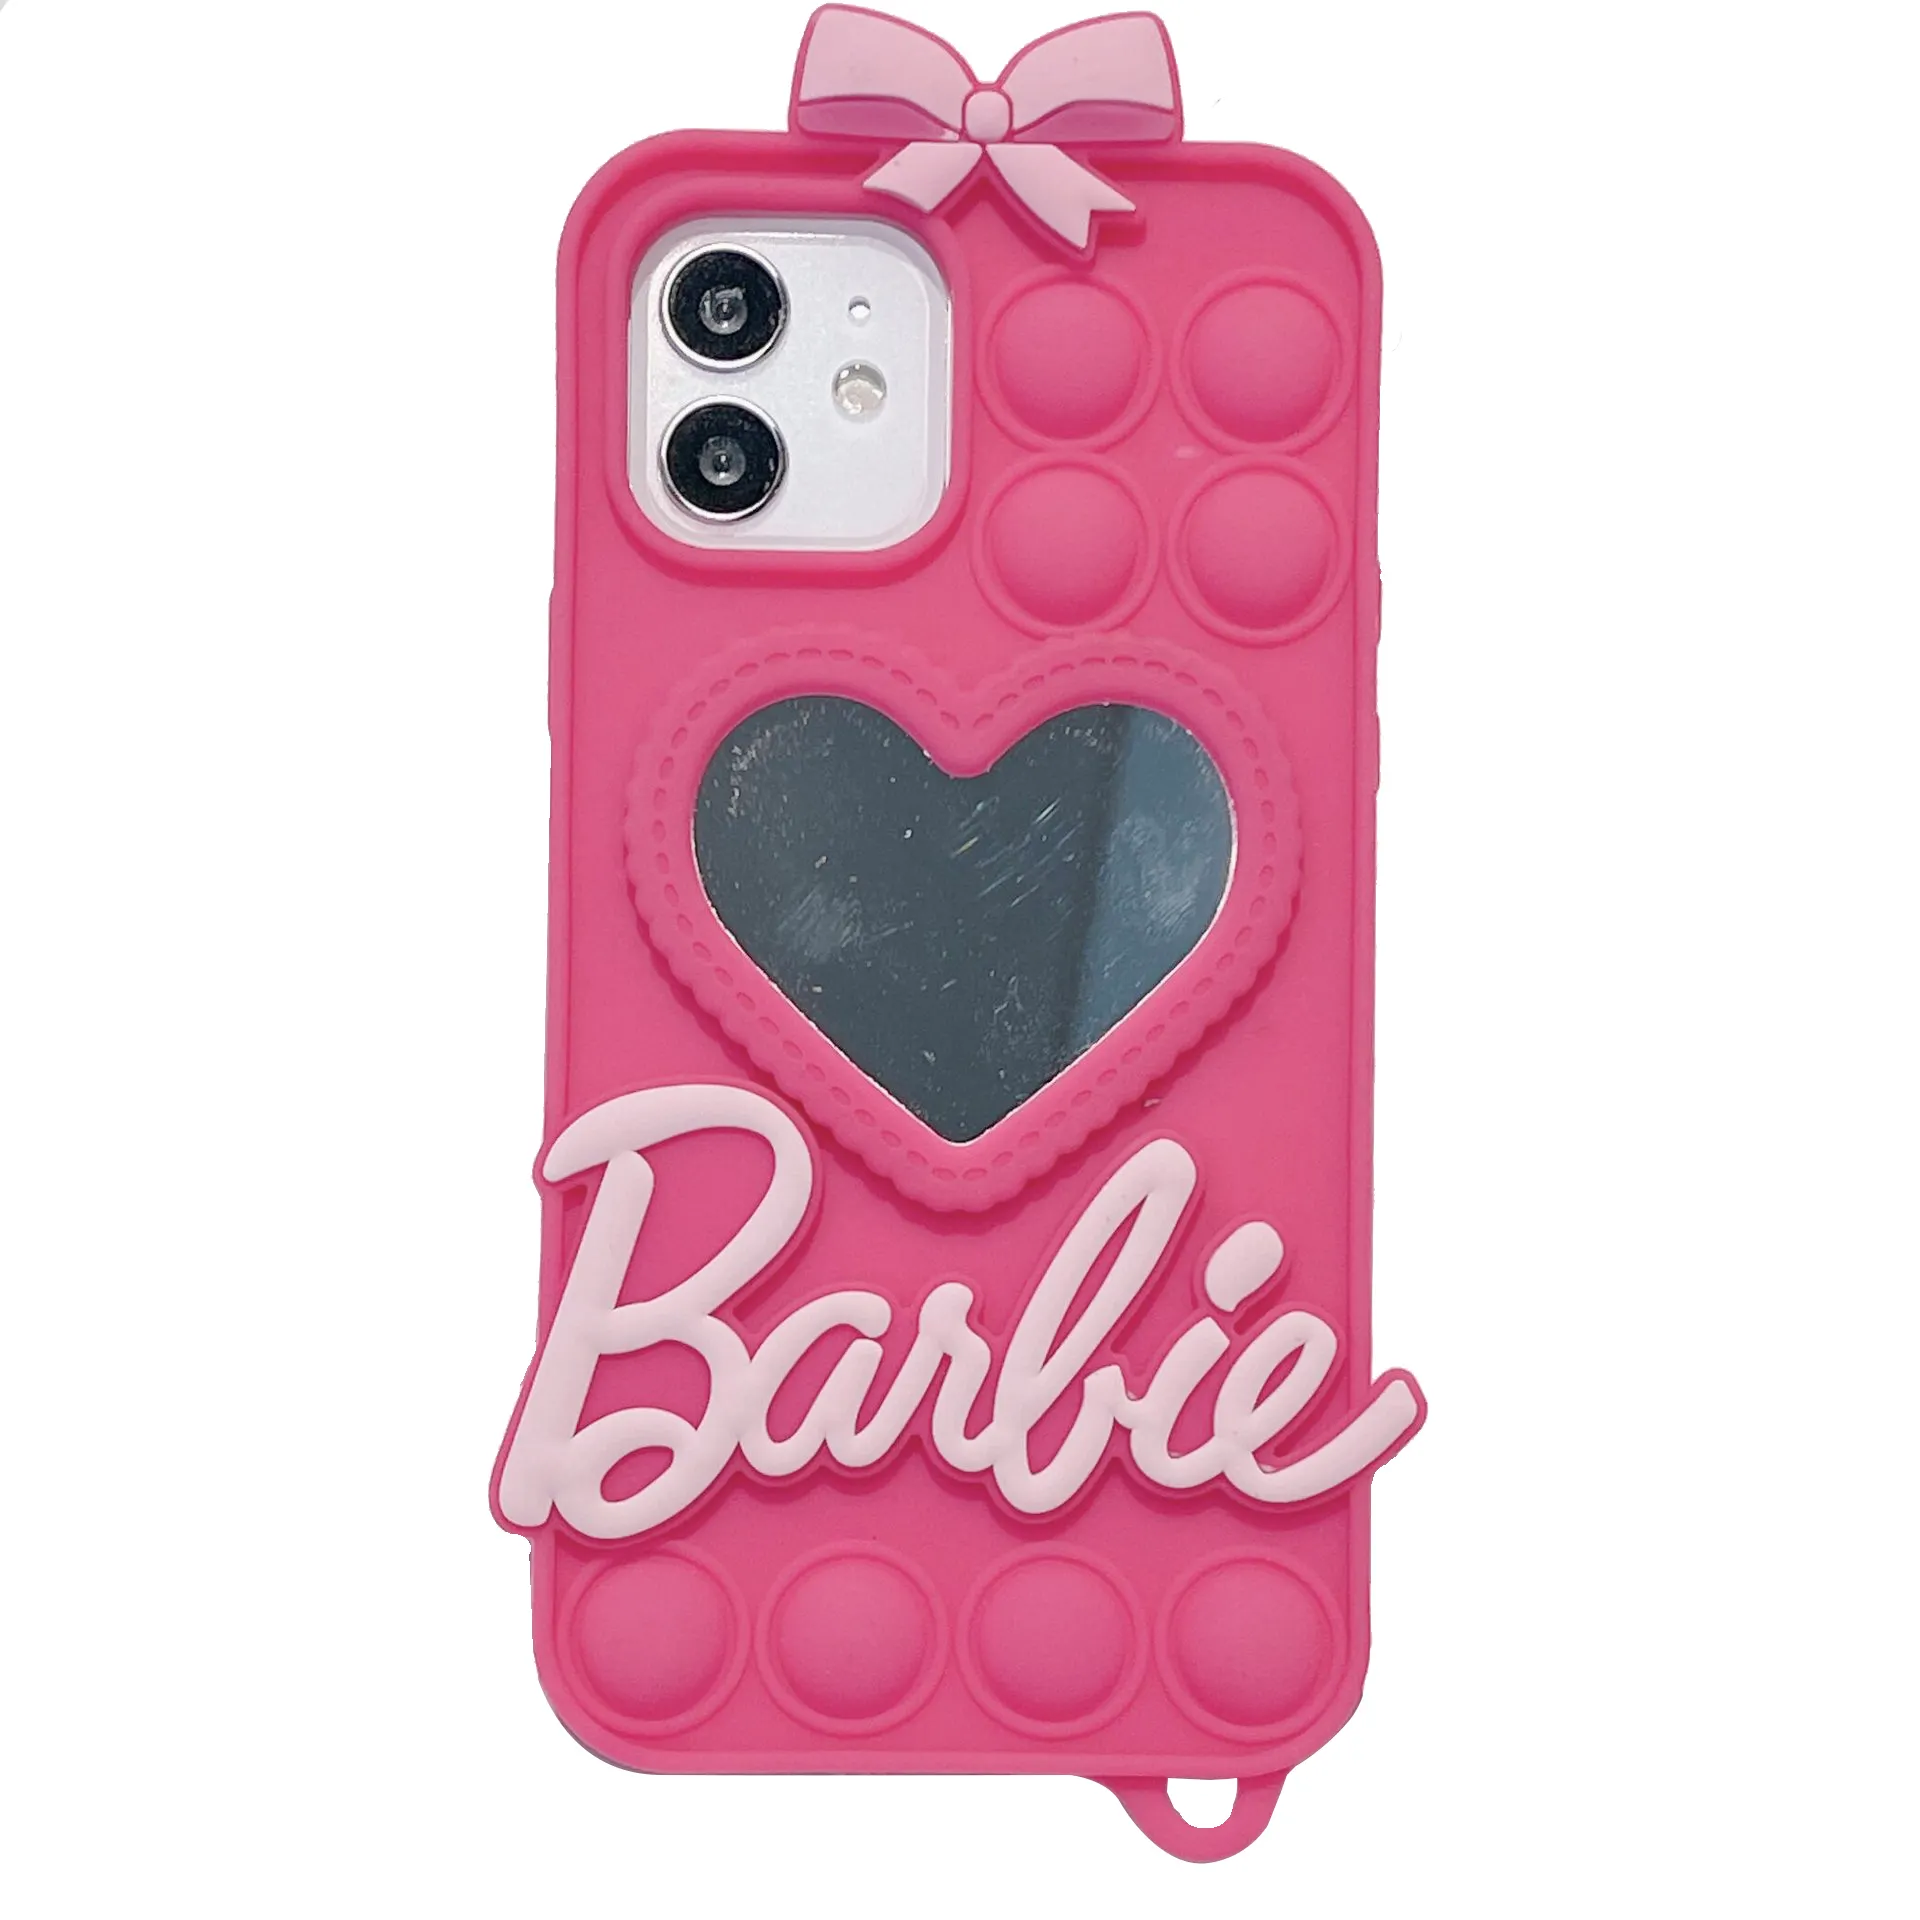 new products silicone mobile phone case for apple iphone 13 pro max Barbie Pink mirror make up phone covers 14 plus